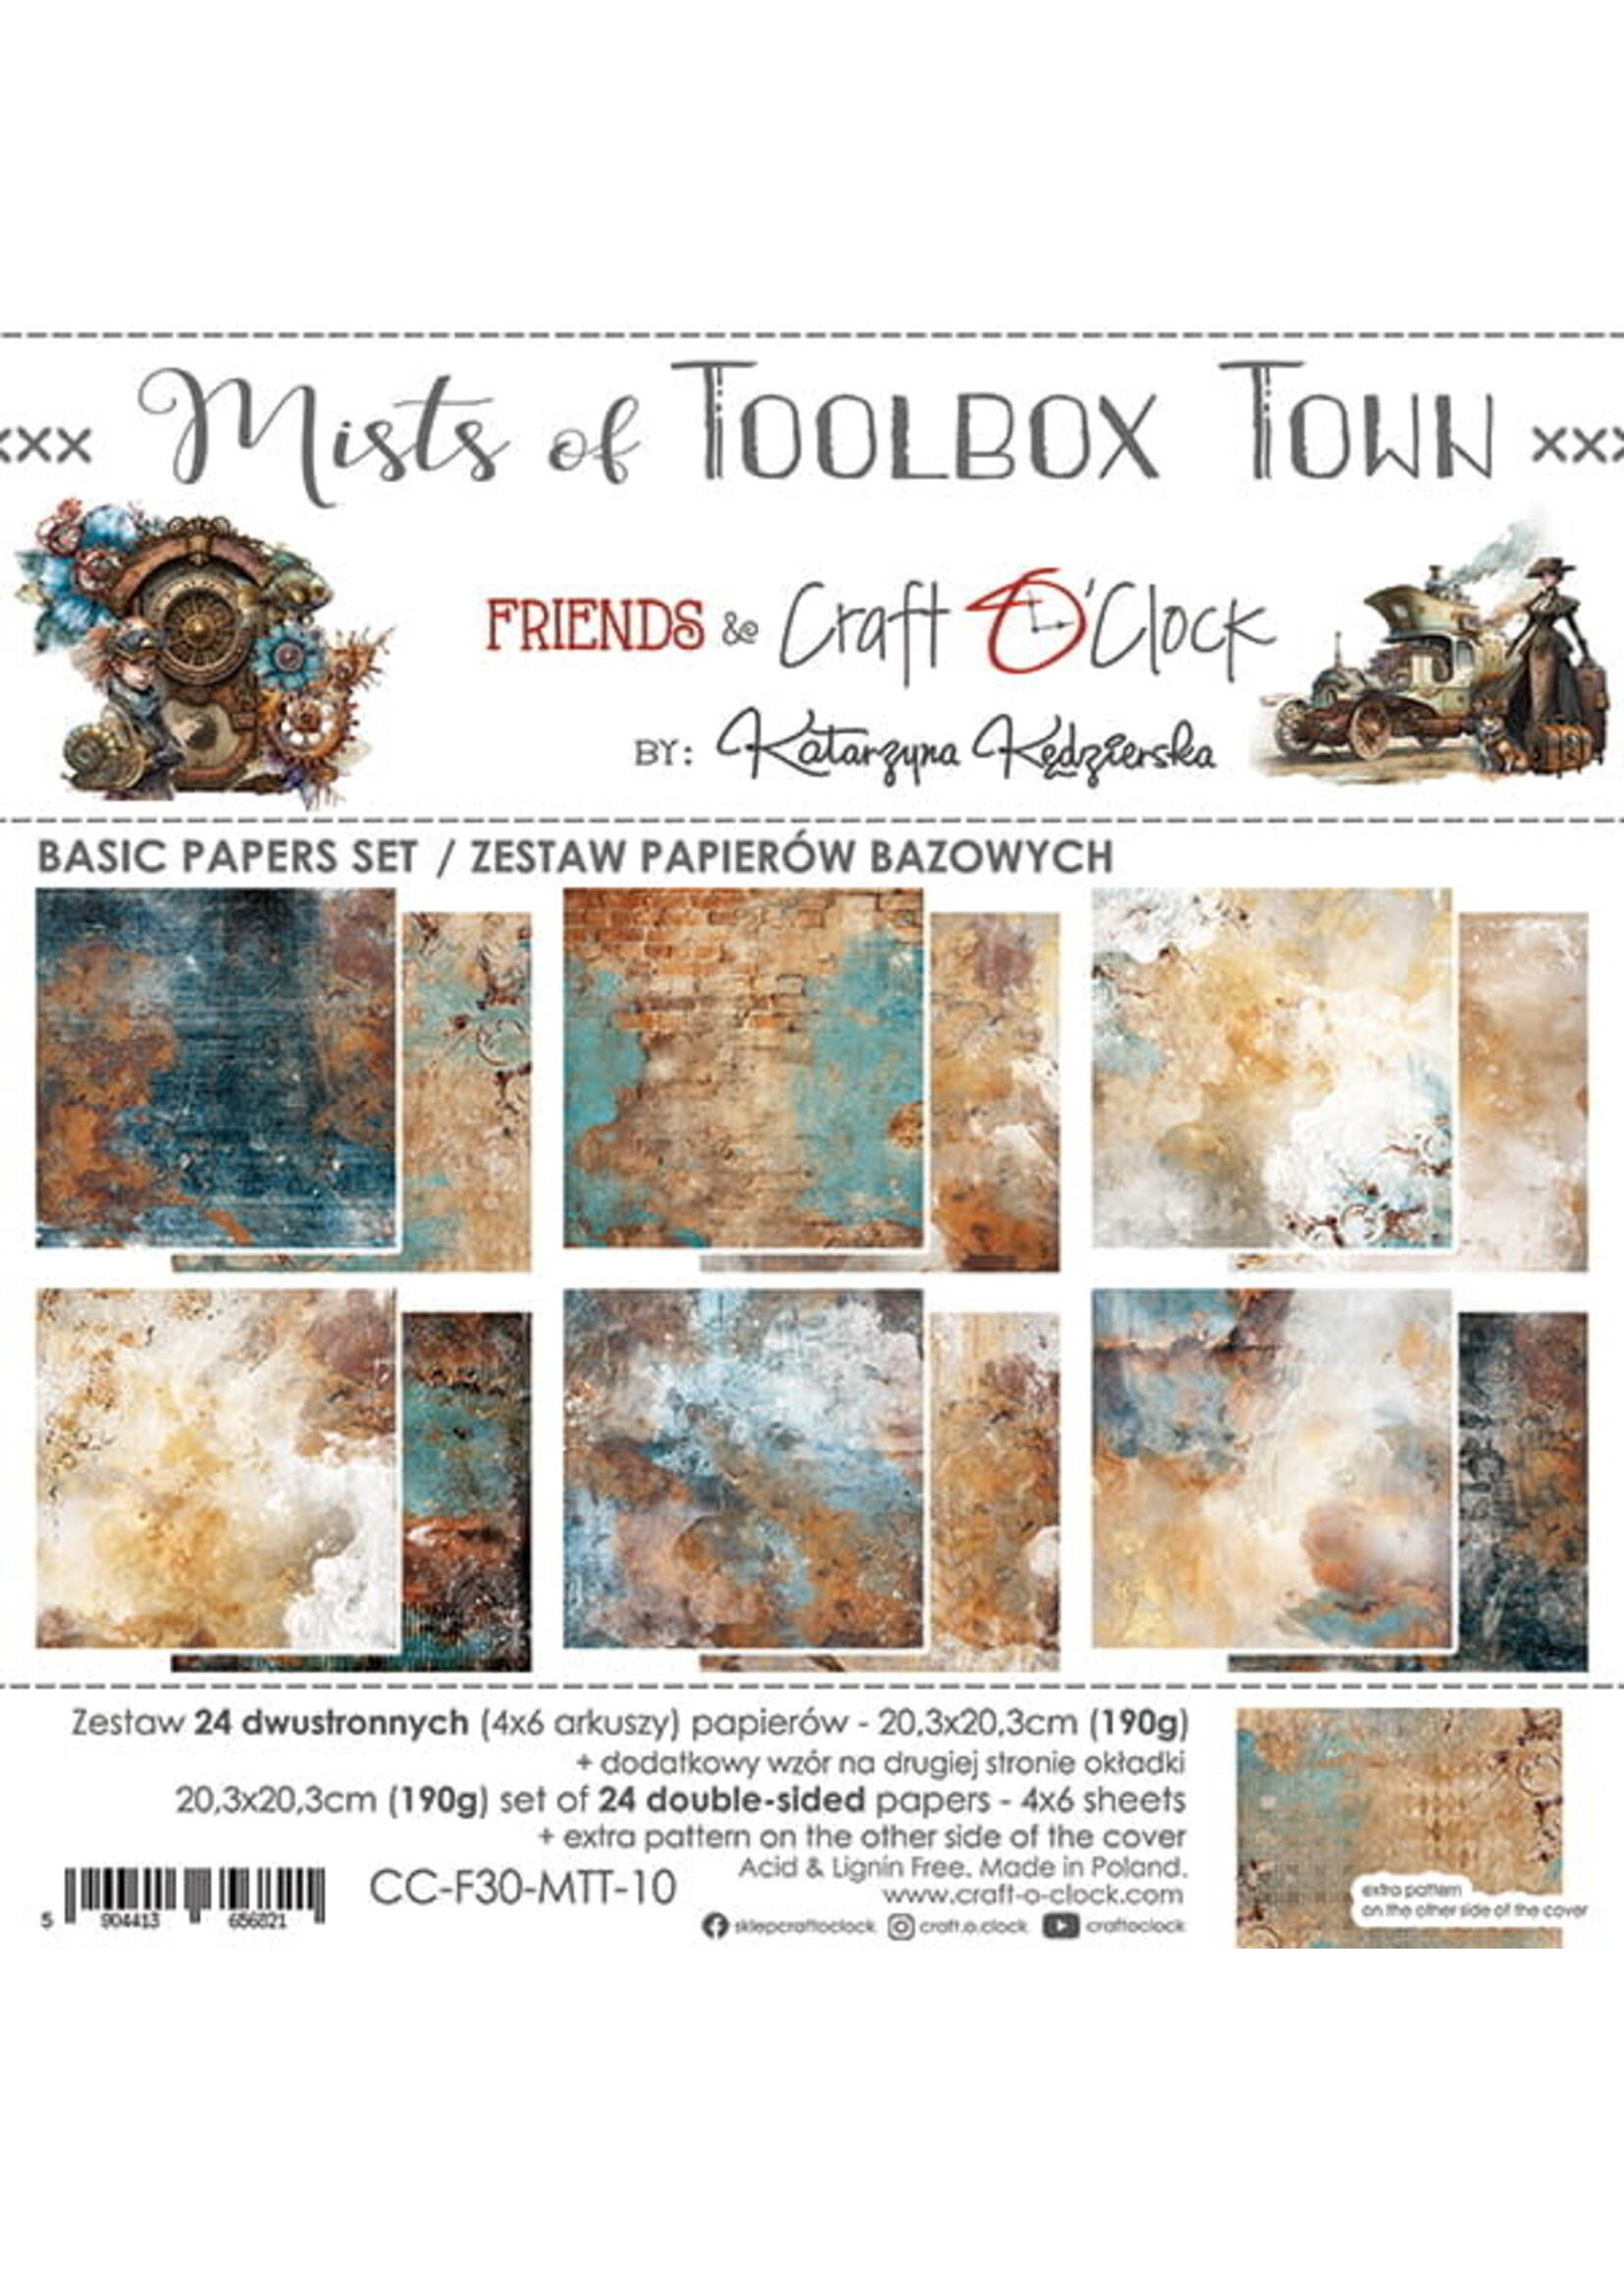 Craft O Clock MISTS OF TOOLBOX TOWN - SET OF BASIC PAPERS 20,3X20,3CM